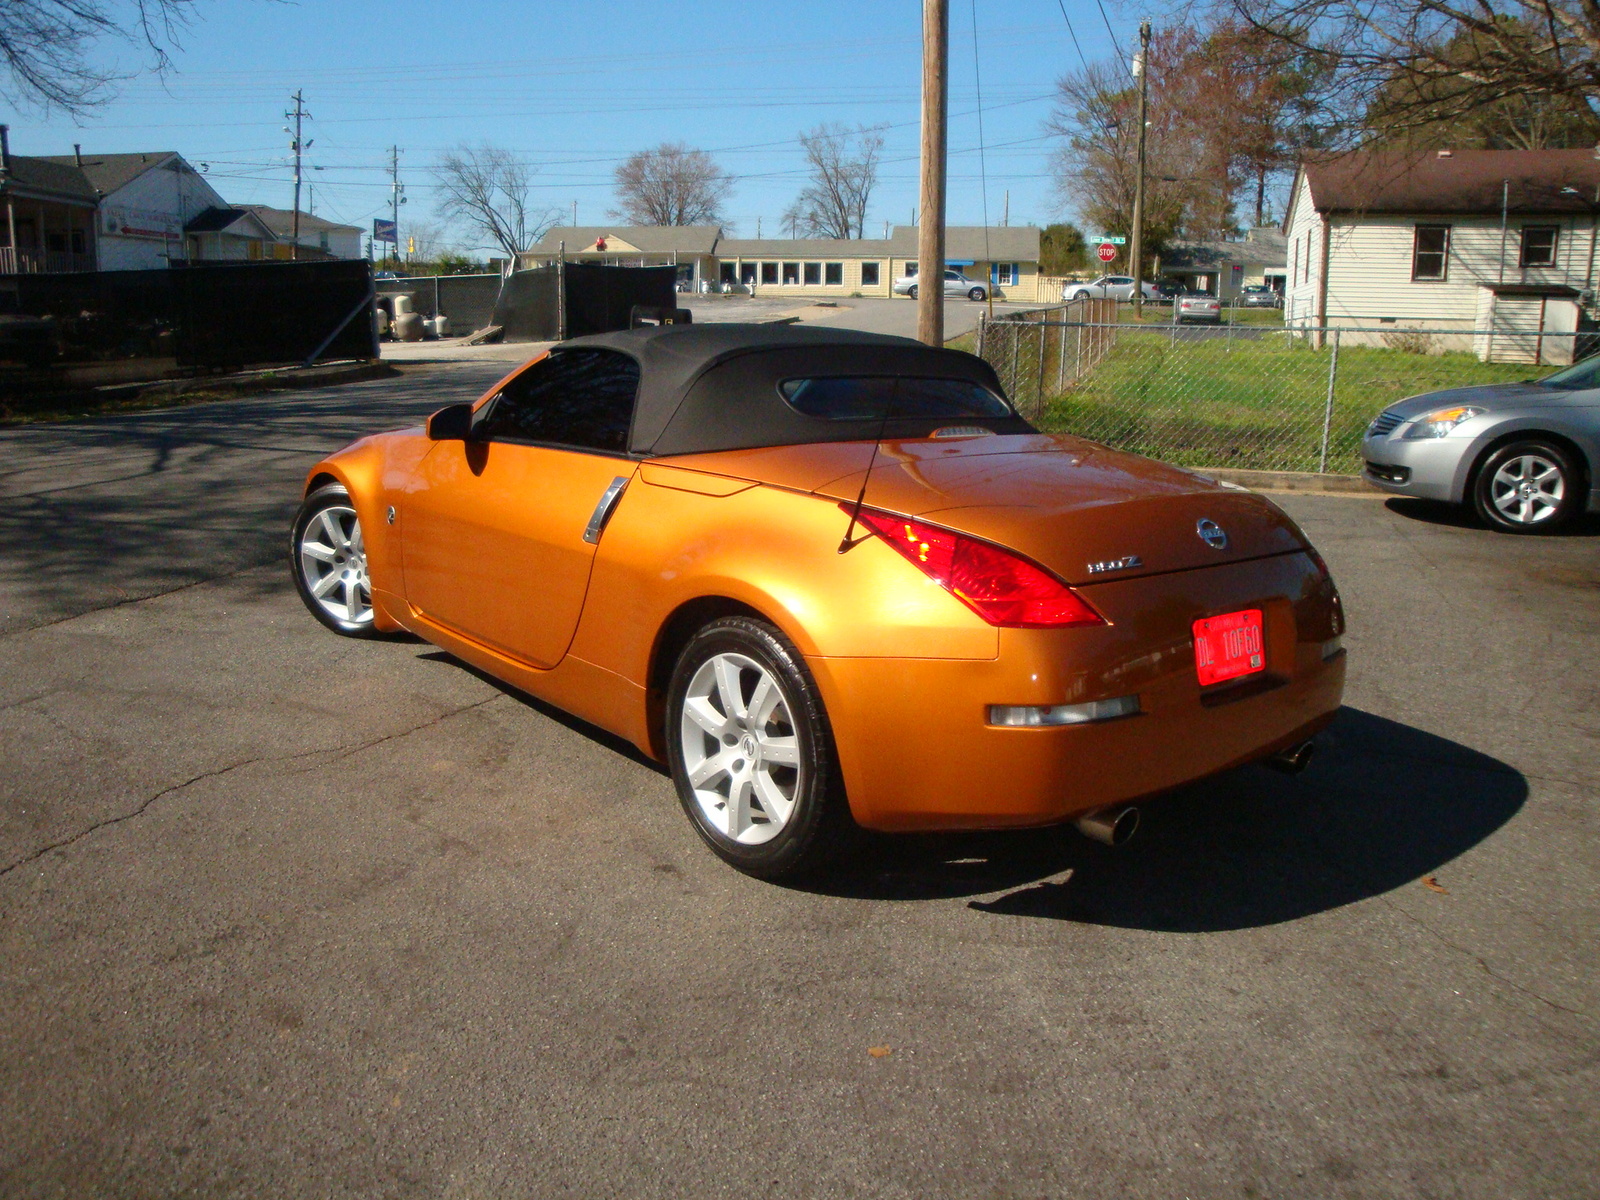 2004 Nissan 350z touring roadster review #9